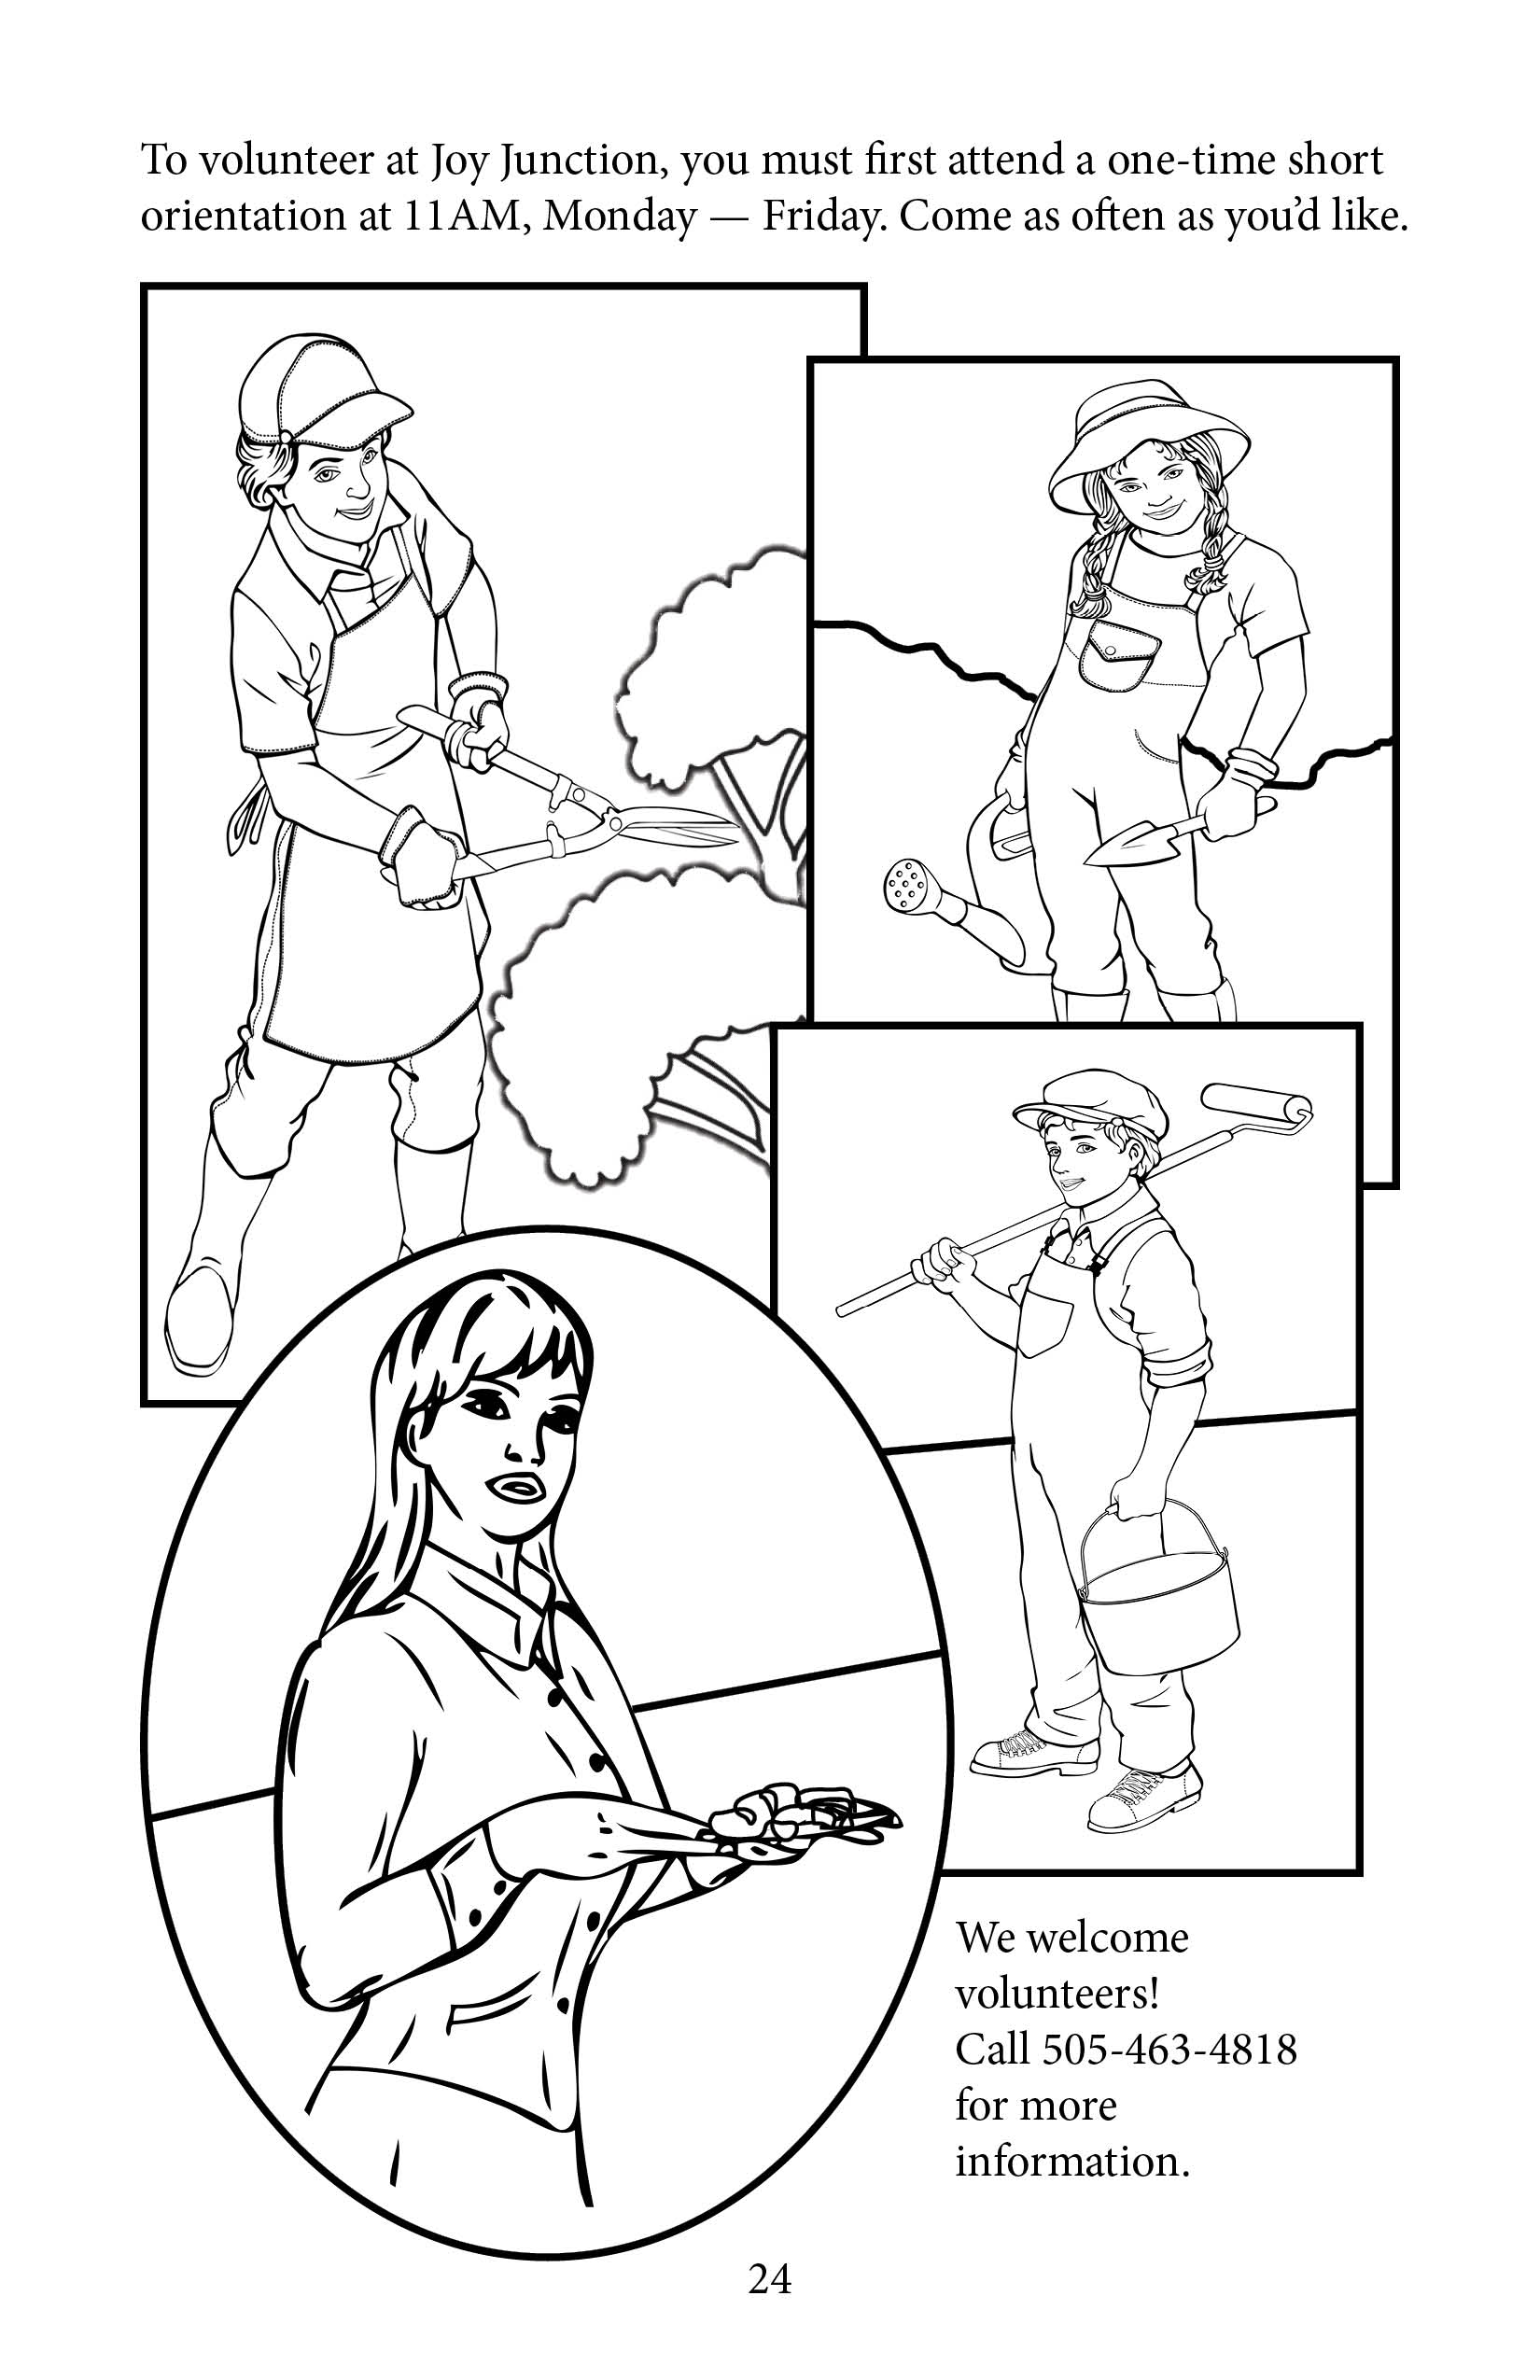 Joy Junction Coloring Book Page 24